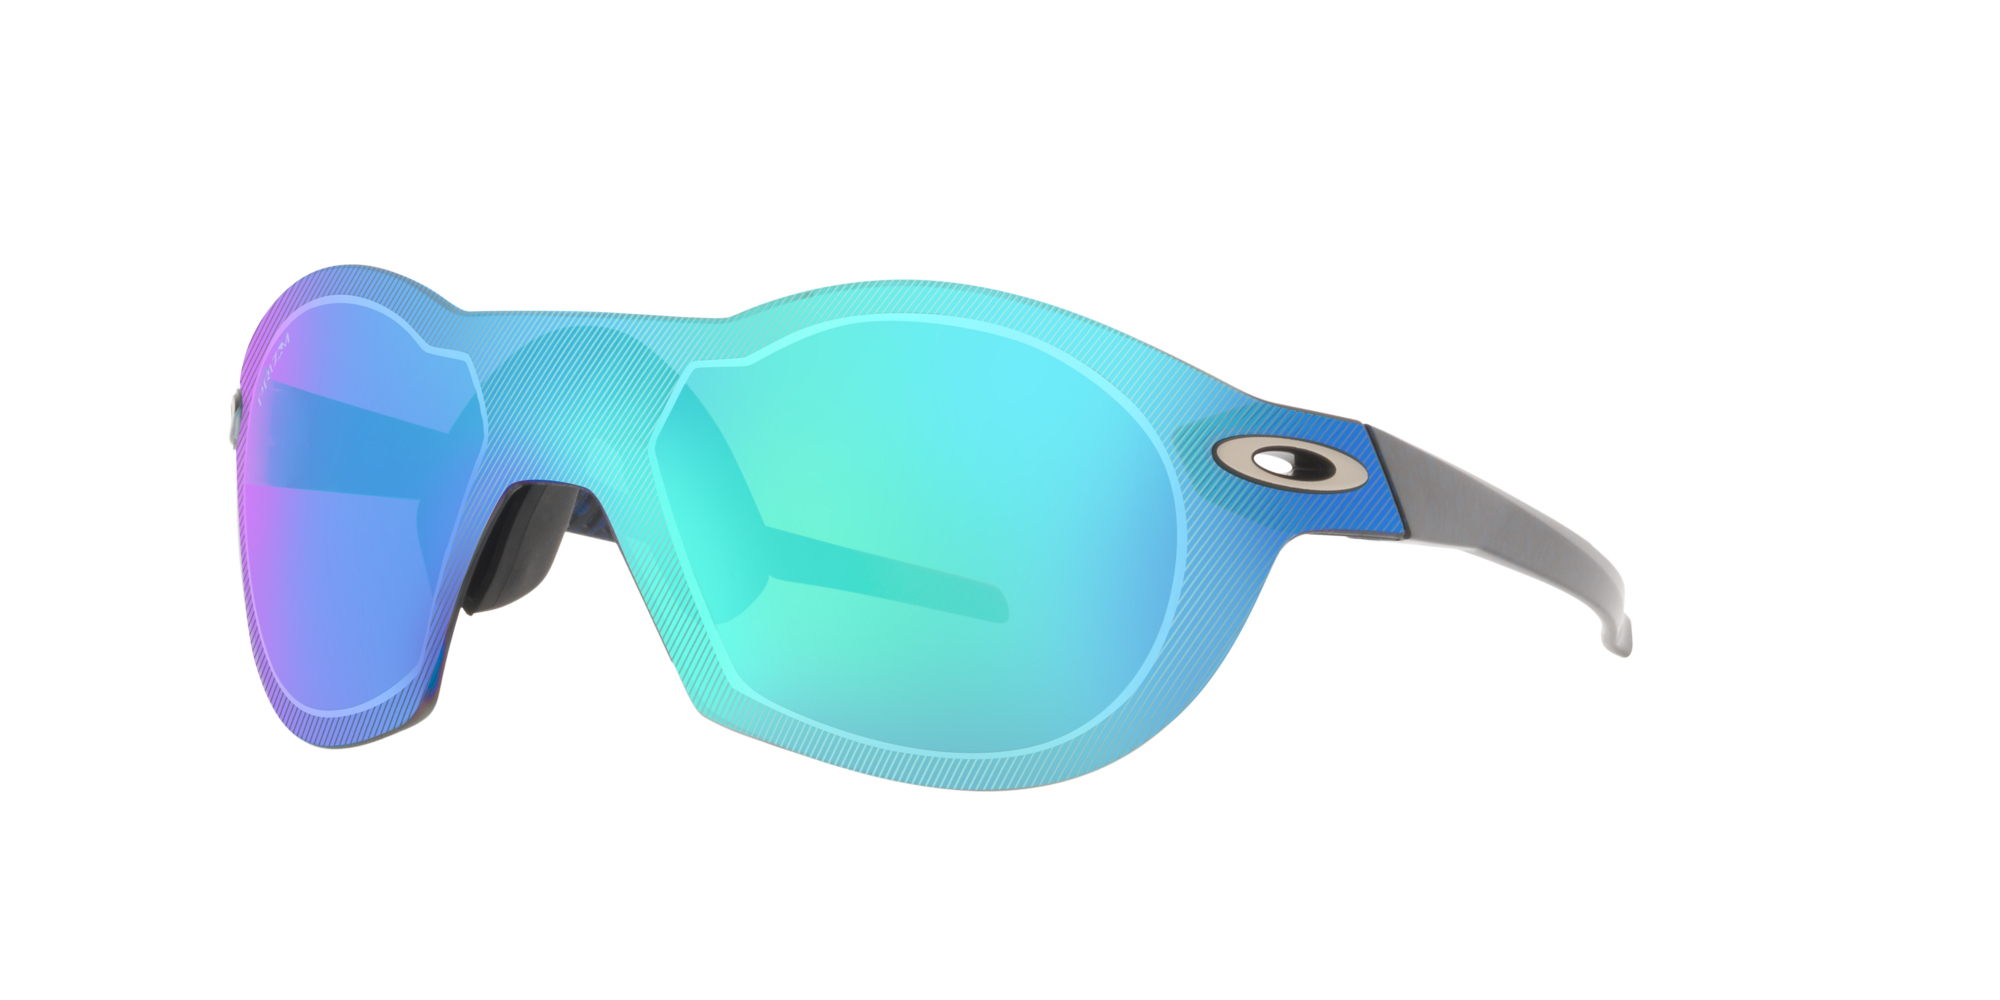 EVERYTHING YOU NEED, NOTHING YOU DON’T: OAKLEY LAUNCHES RE:SUBZERO